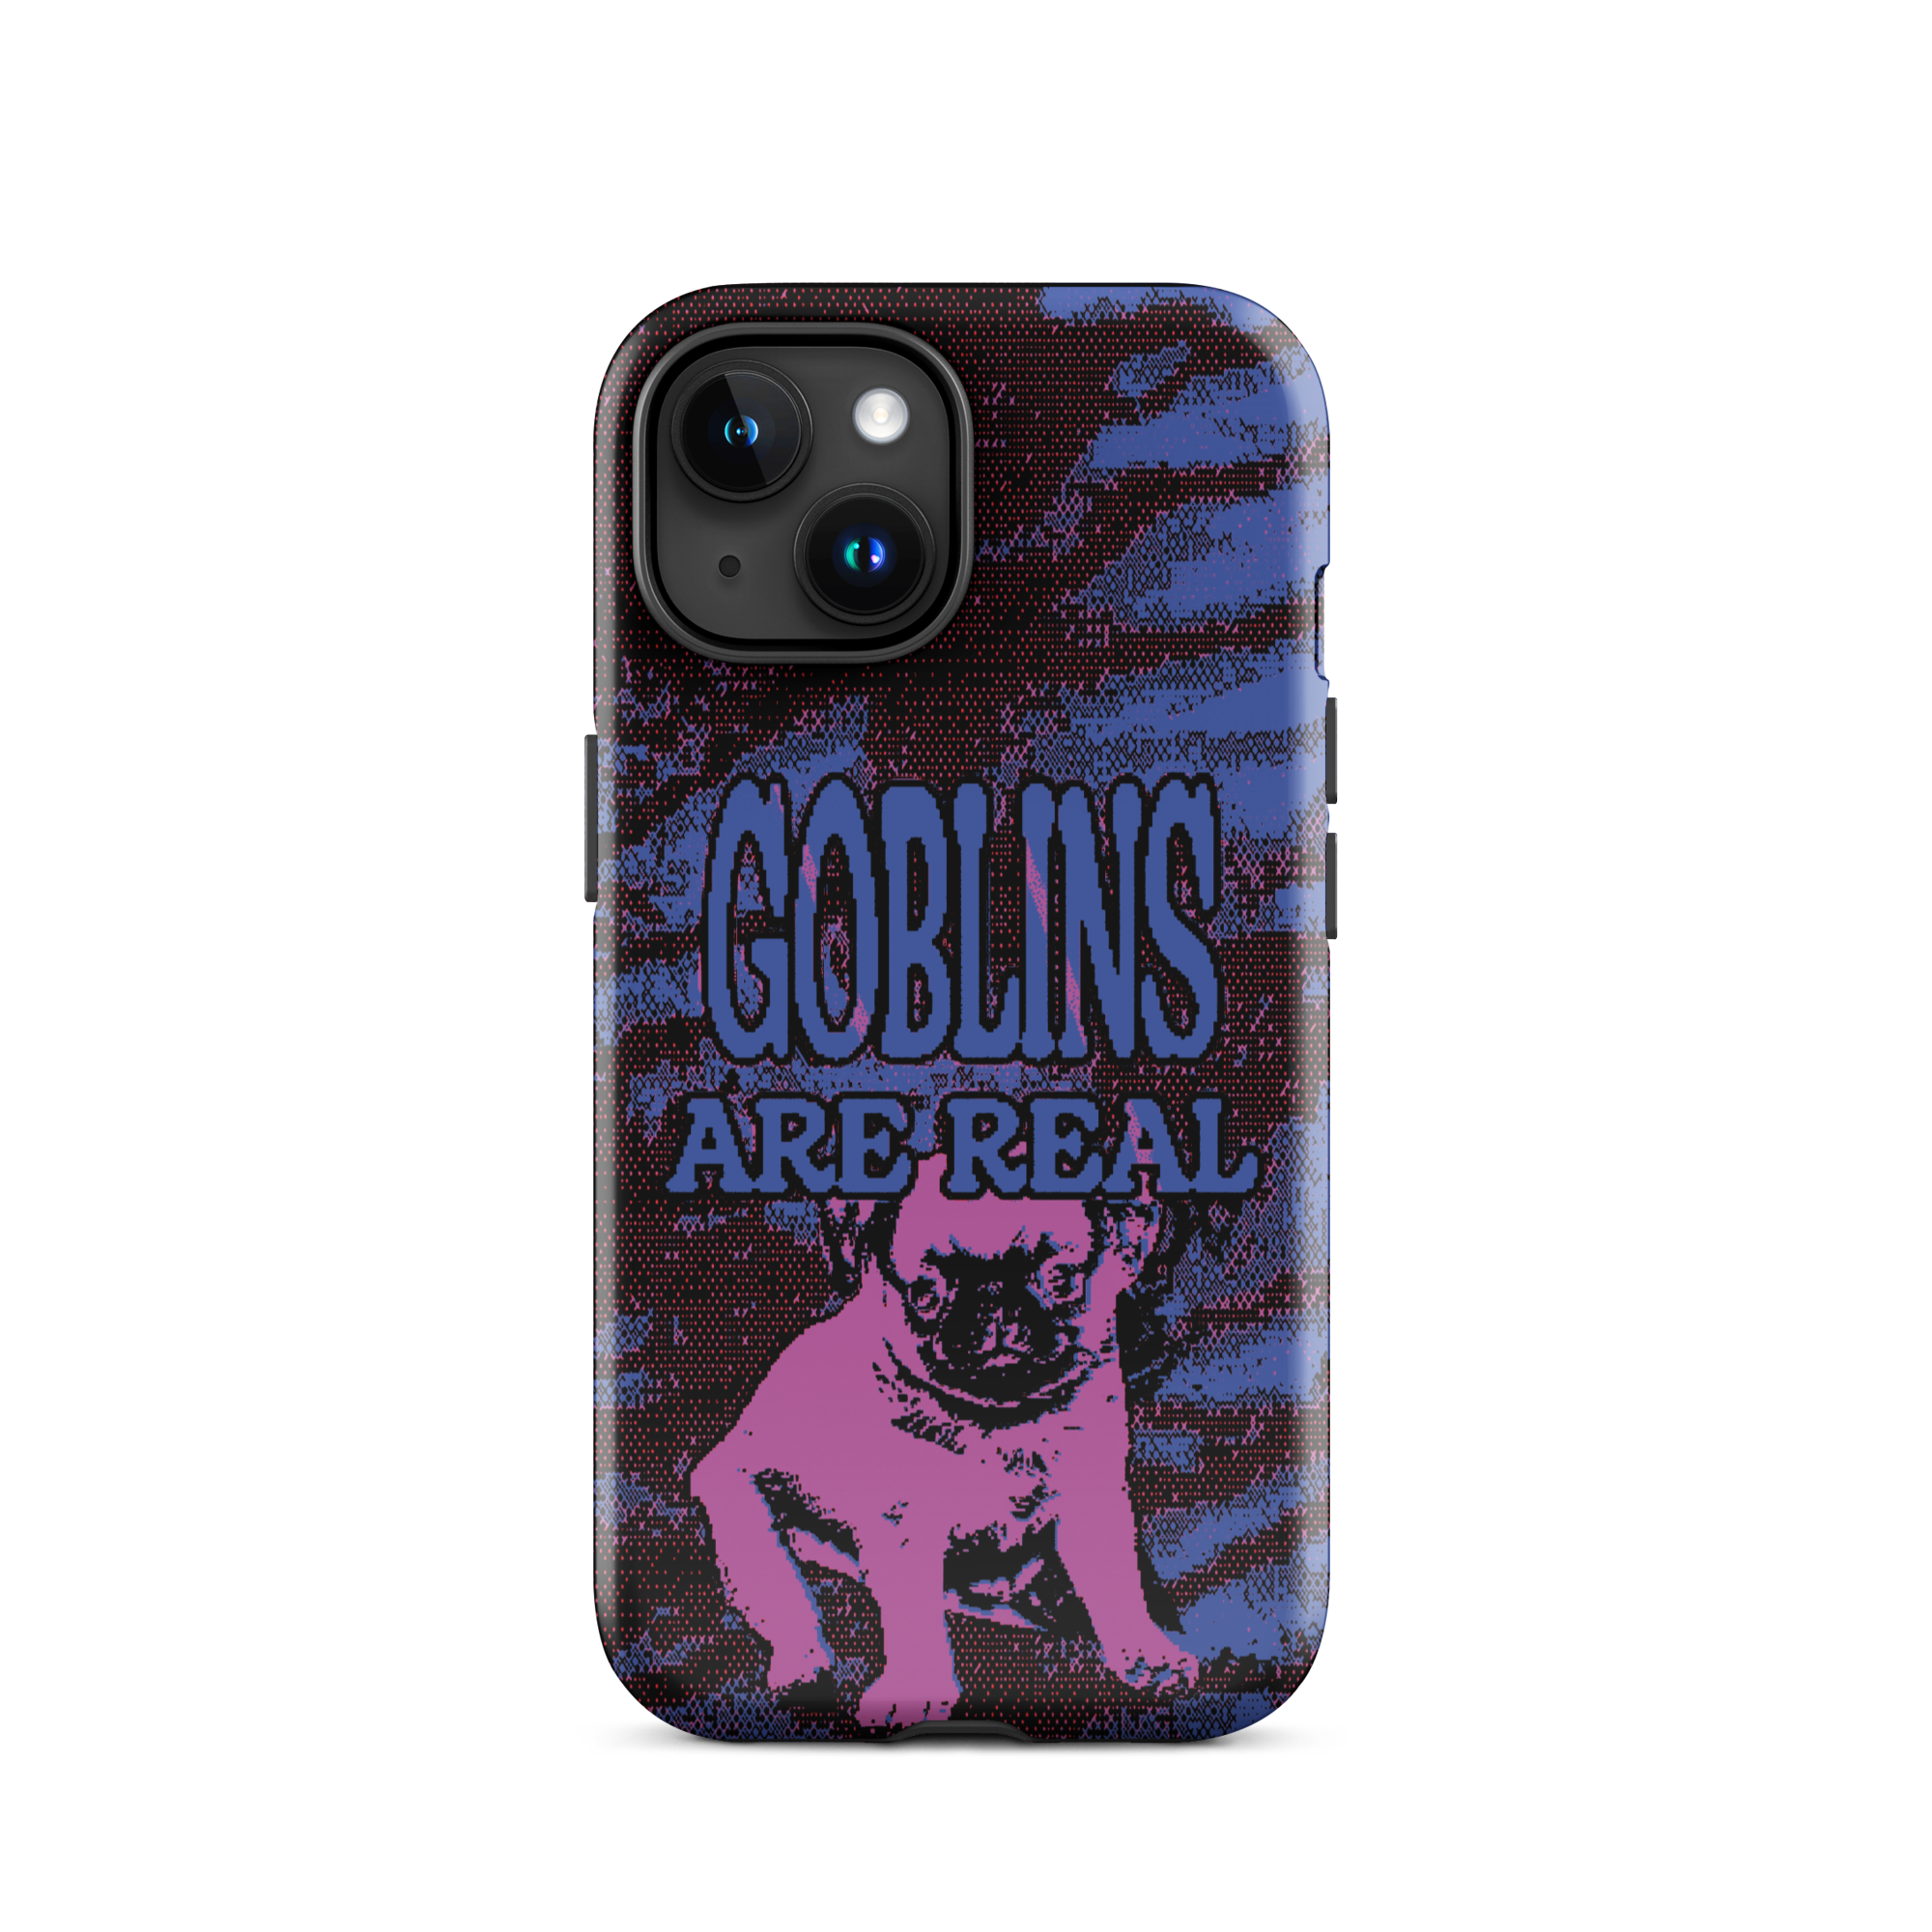 iphone tough case - goblins are real